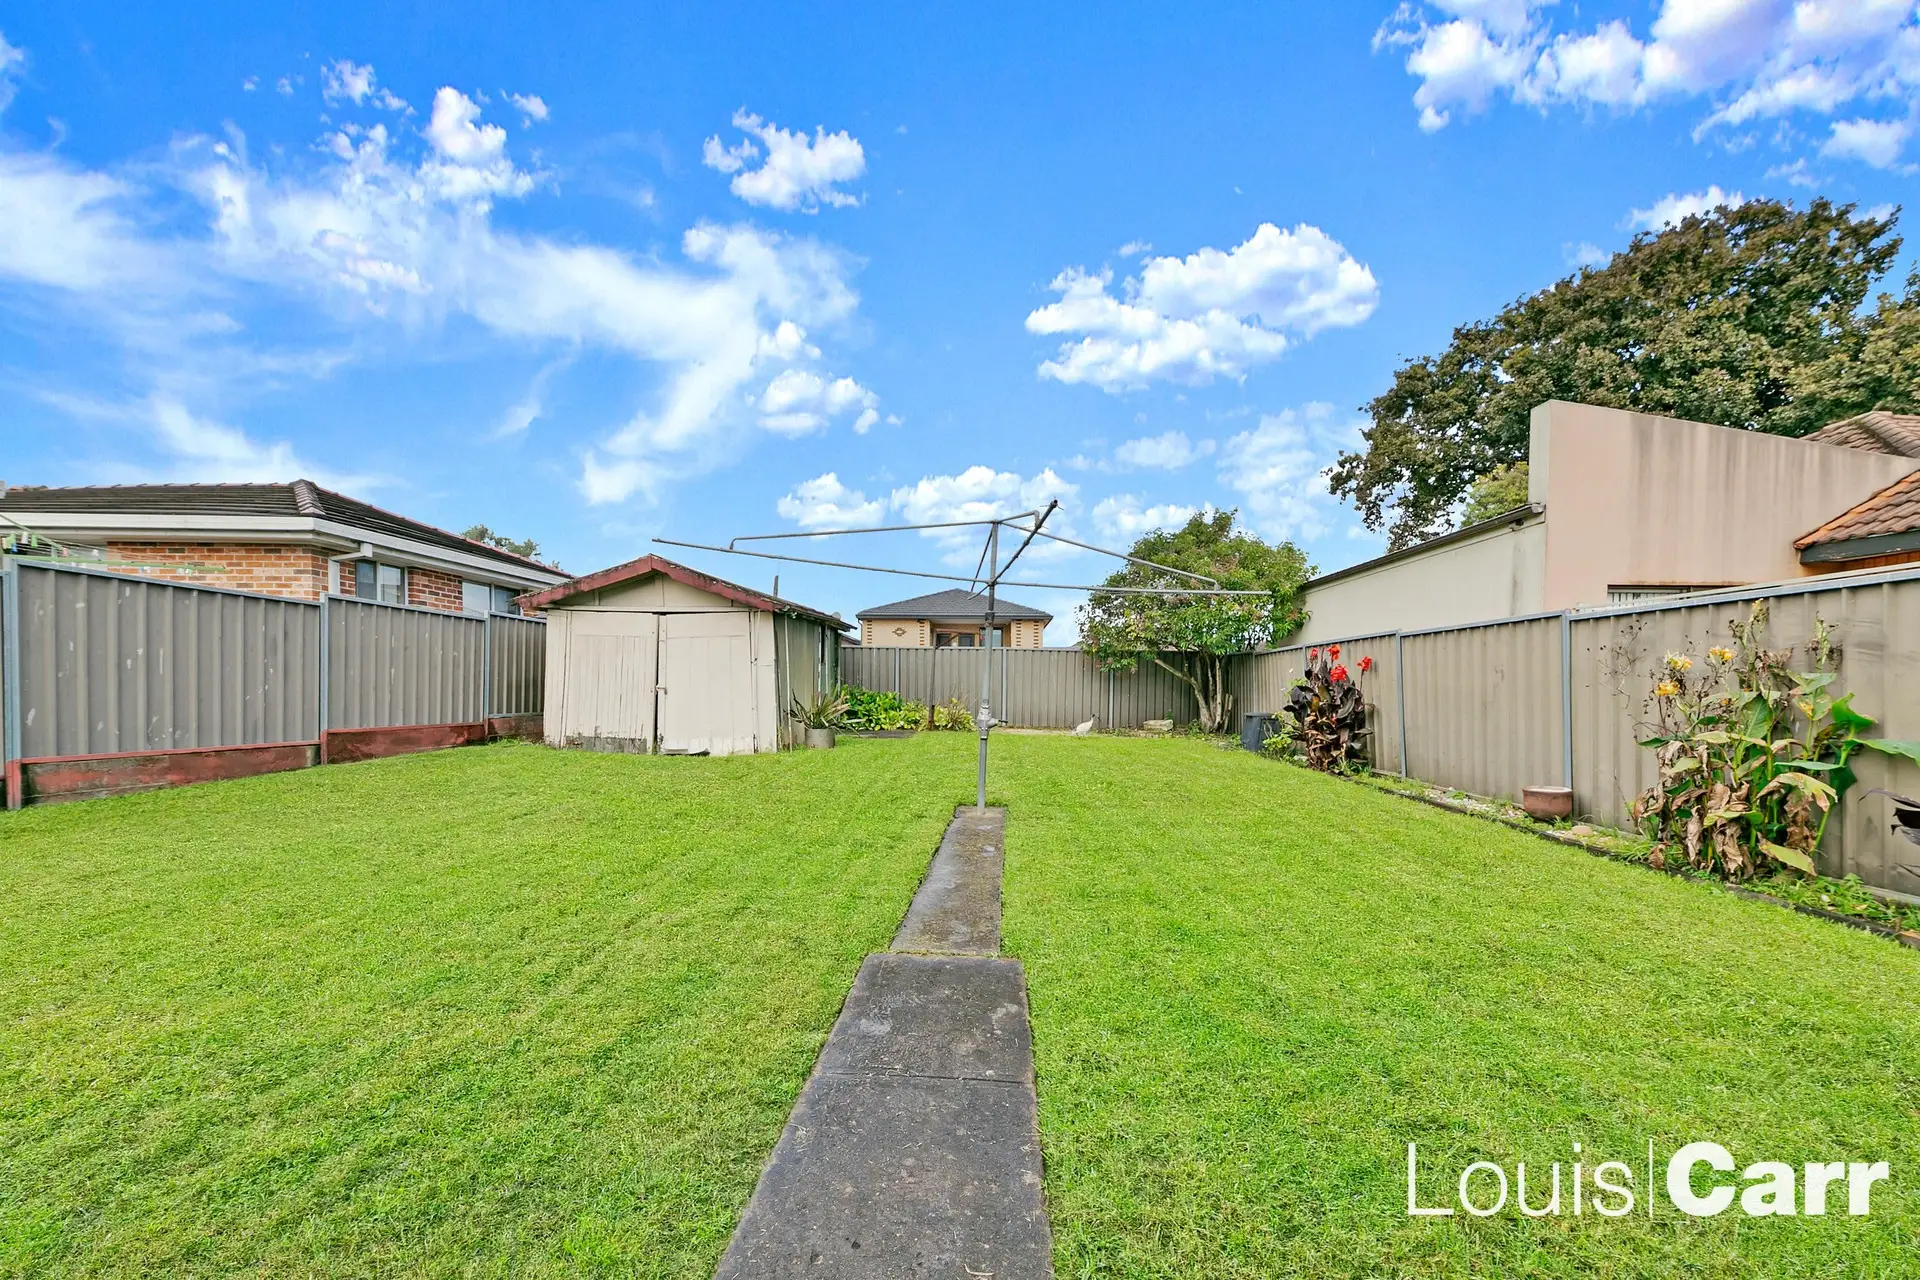 Photo #2: 44 McArthur Street, Guildford - Sold by Louis Carr Real Estate